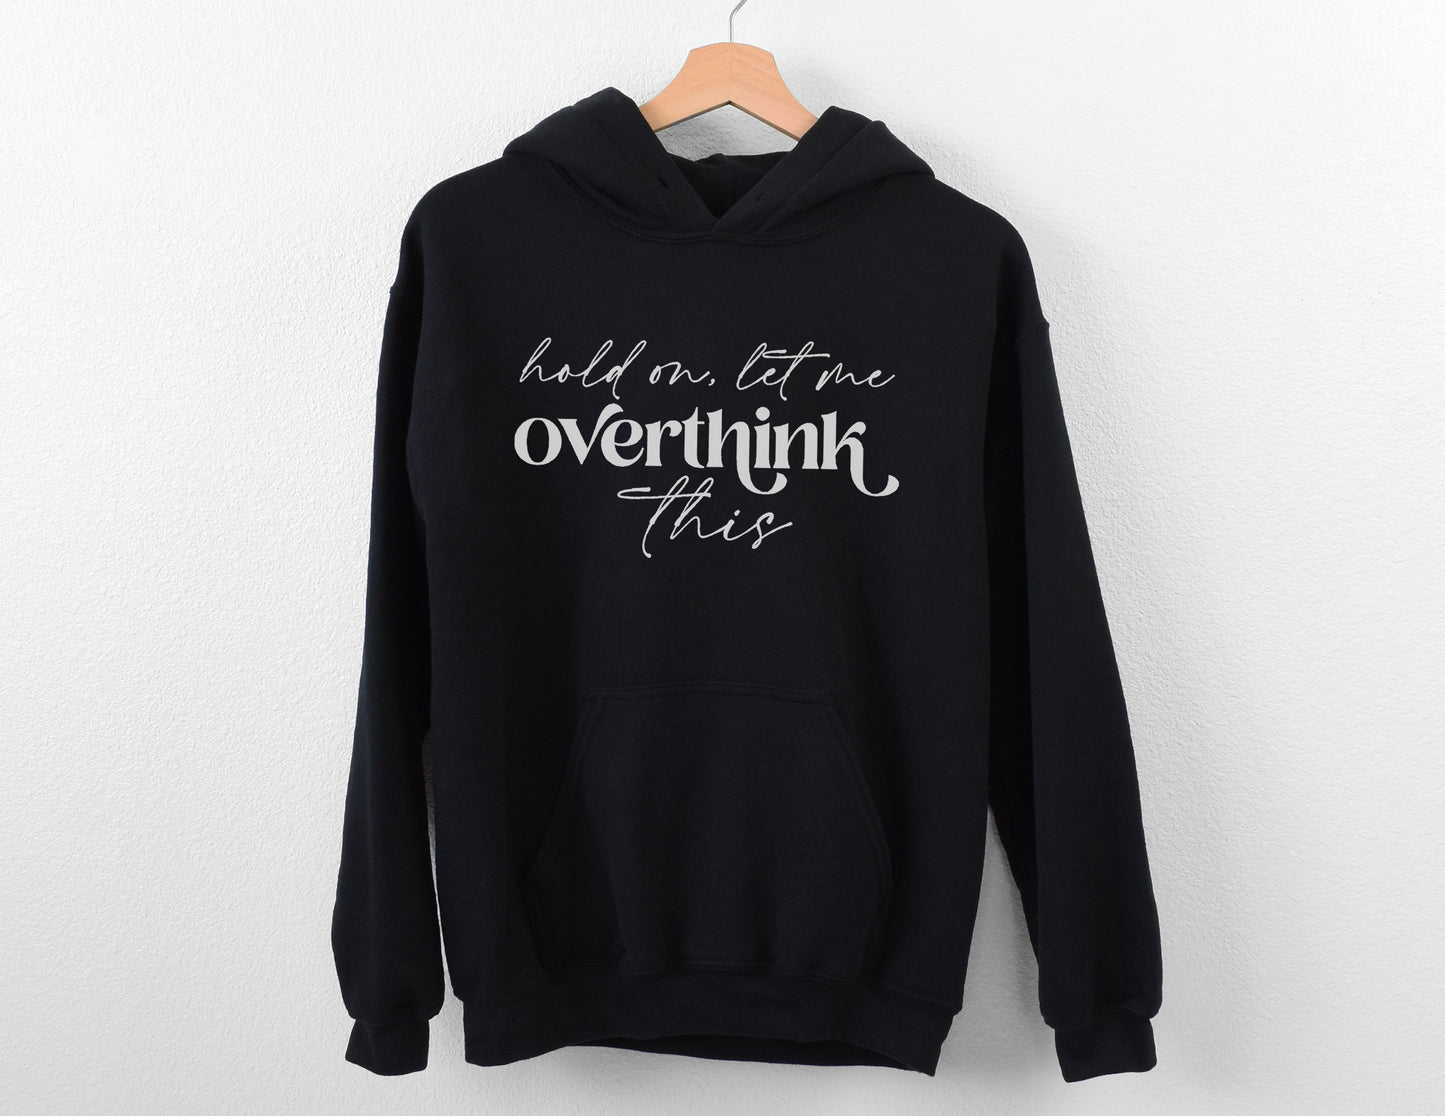 Hold On Let Me Overthink This Hoodie